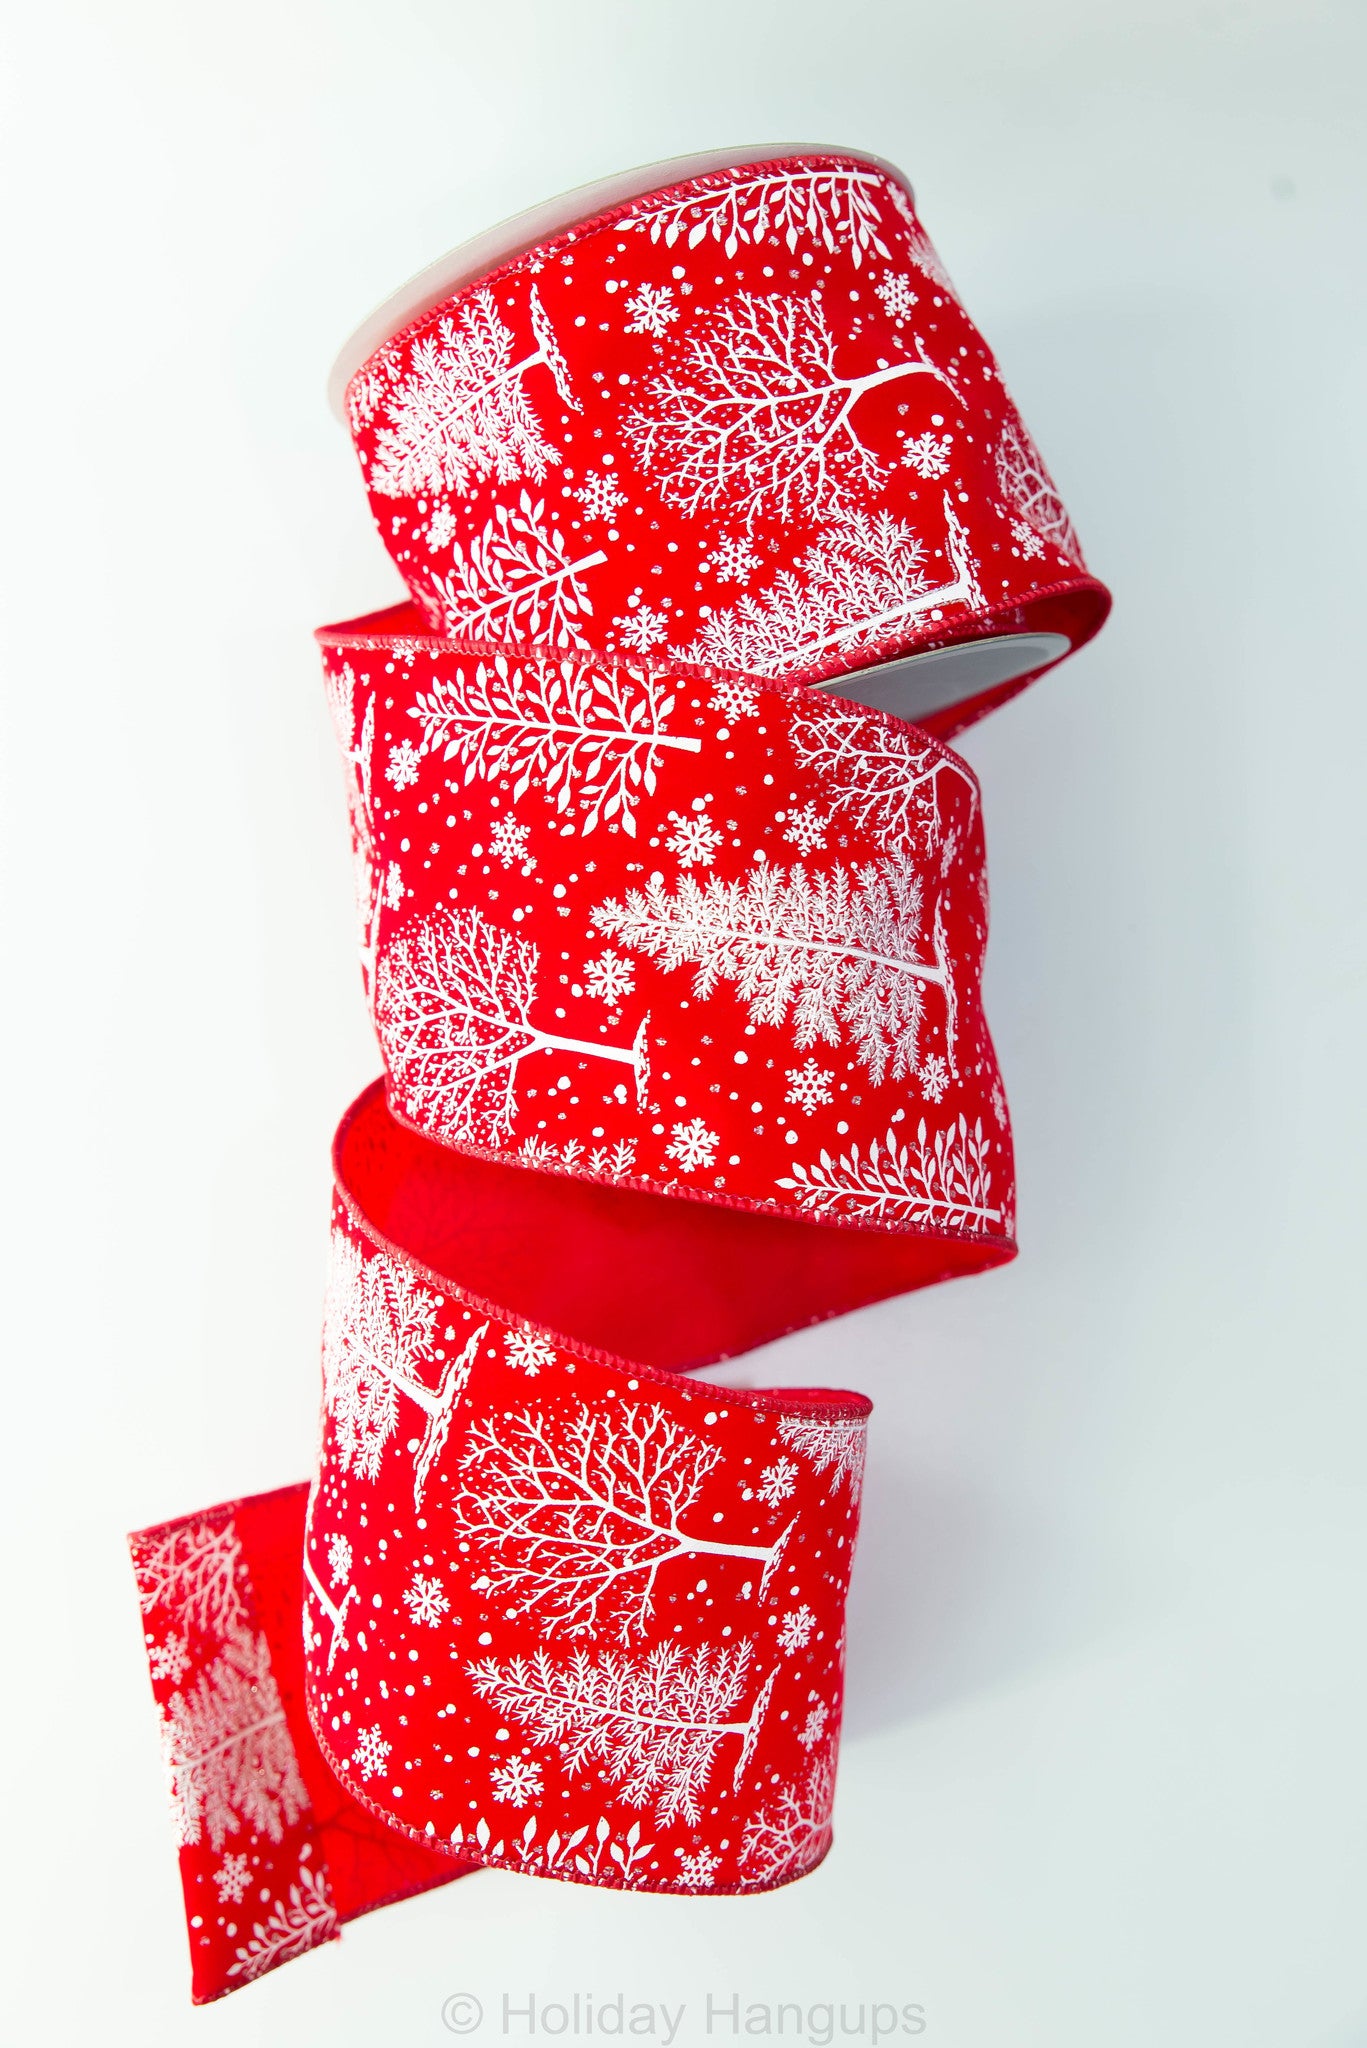 red Christmas ribbon. winter forest Christmas ribbon, Christmas trees ribbon, Designer Christmas ribbon, wired ribbon, wired Christmas ribbon, Christmas tree ribbon, wide Christmas ribbon, 4 inch wired Christmas ribbon, luxury Christmas tree ribbon, wide wired Christmas ribbon, Christmas tree ribbon, wired Christmas tree ribbon, Christmas tree decorations